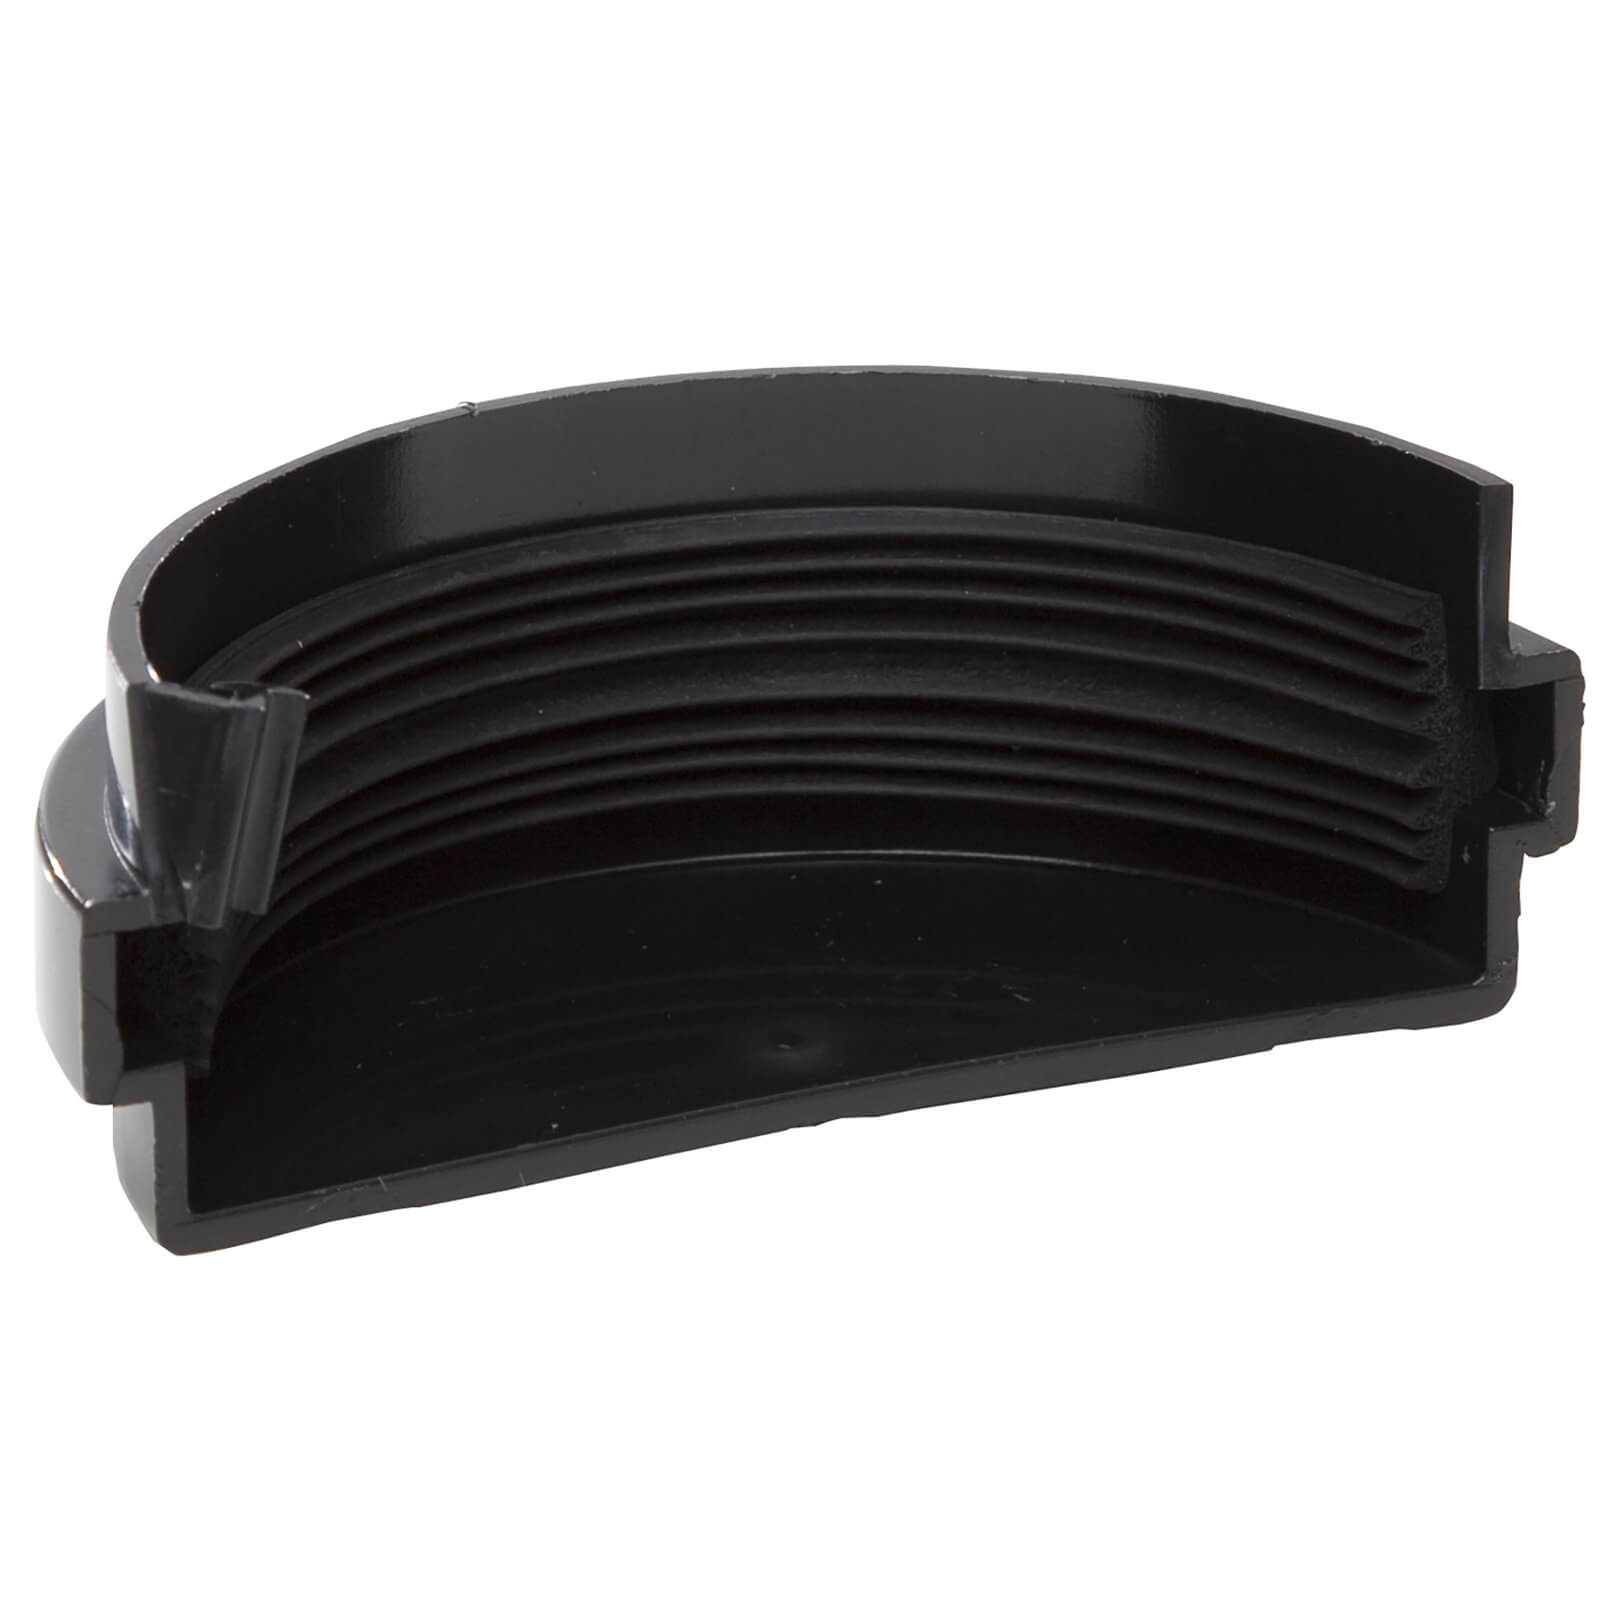 Polypipe Half Round 75mm External Stop End Black